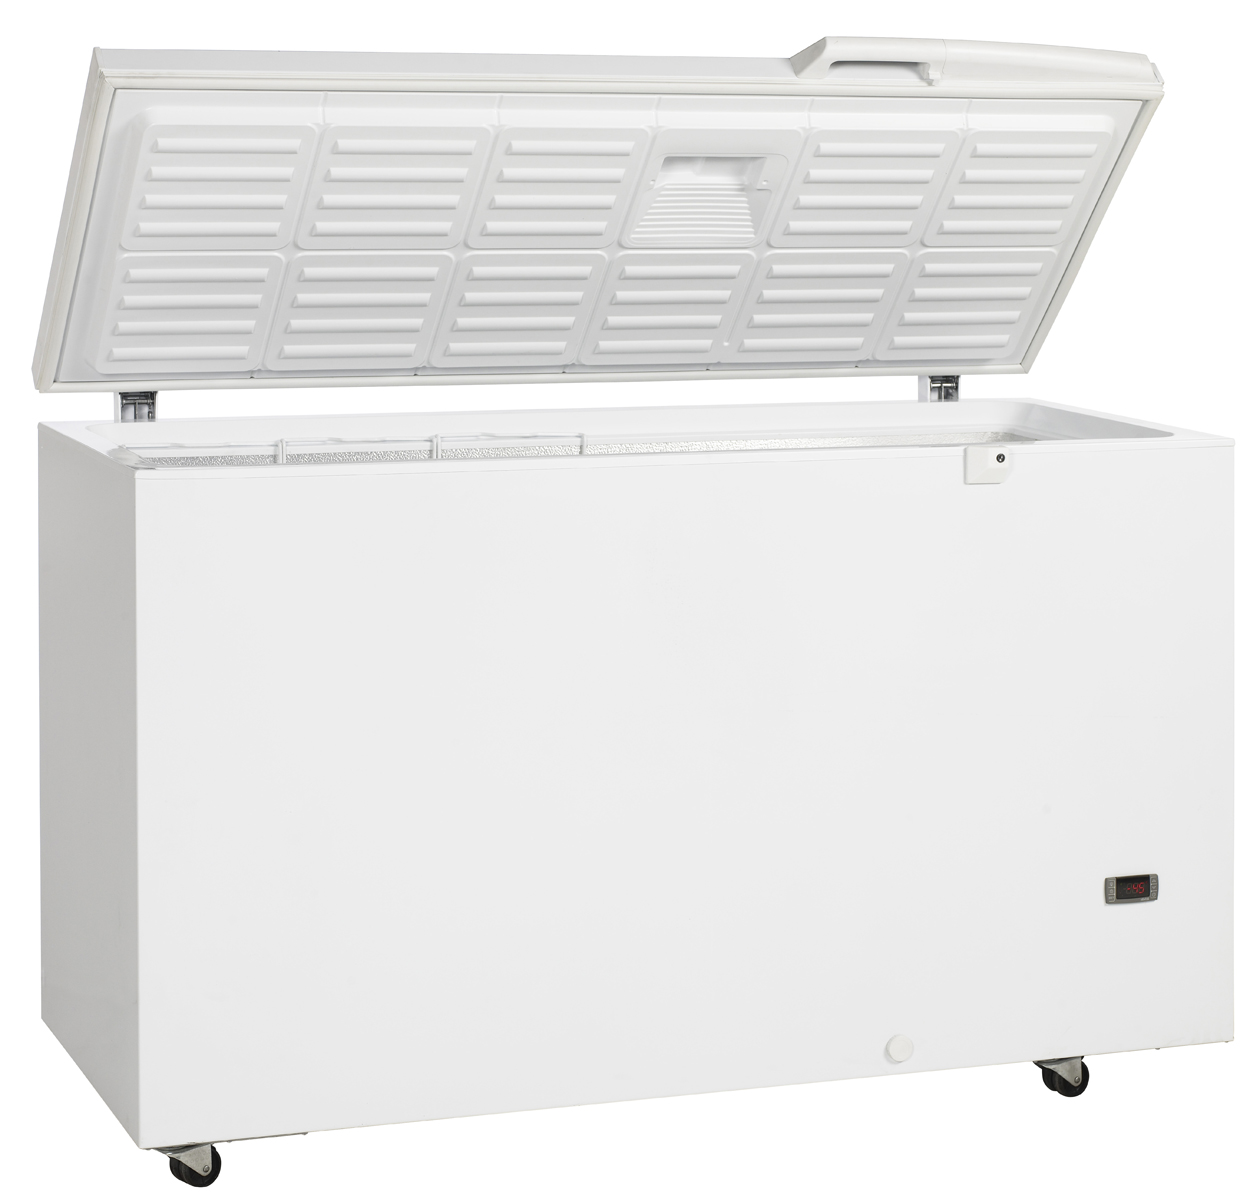 An image of Tefcold SE40 Chest Freezer